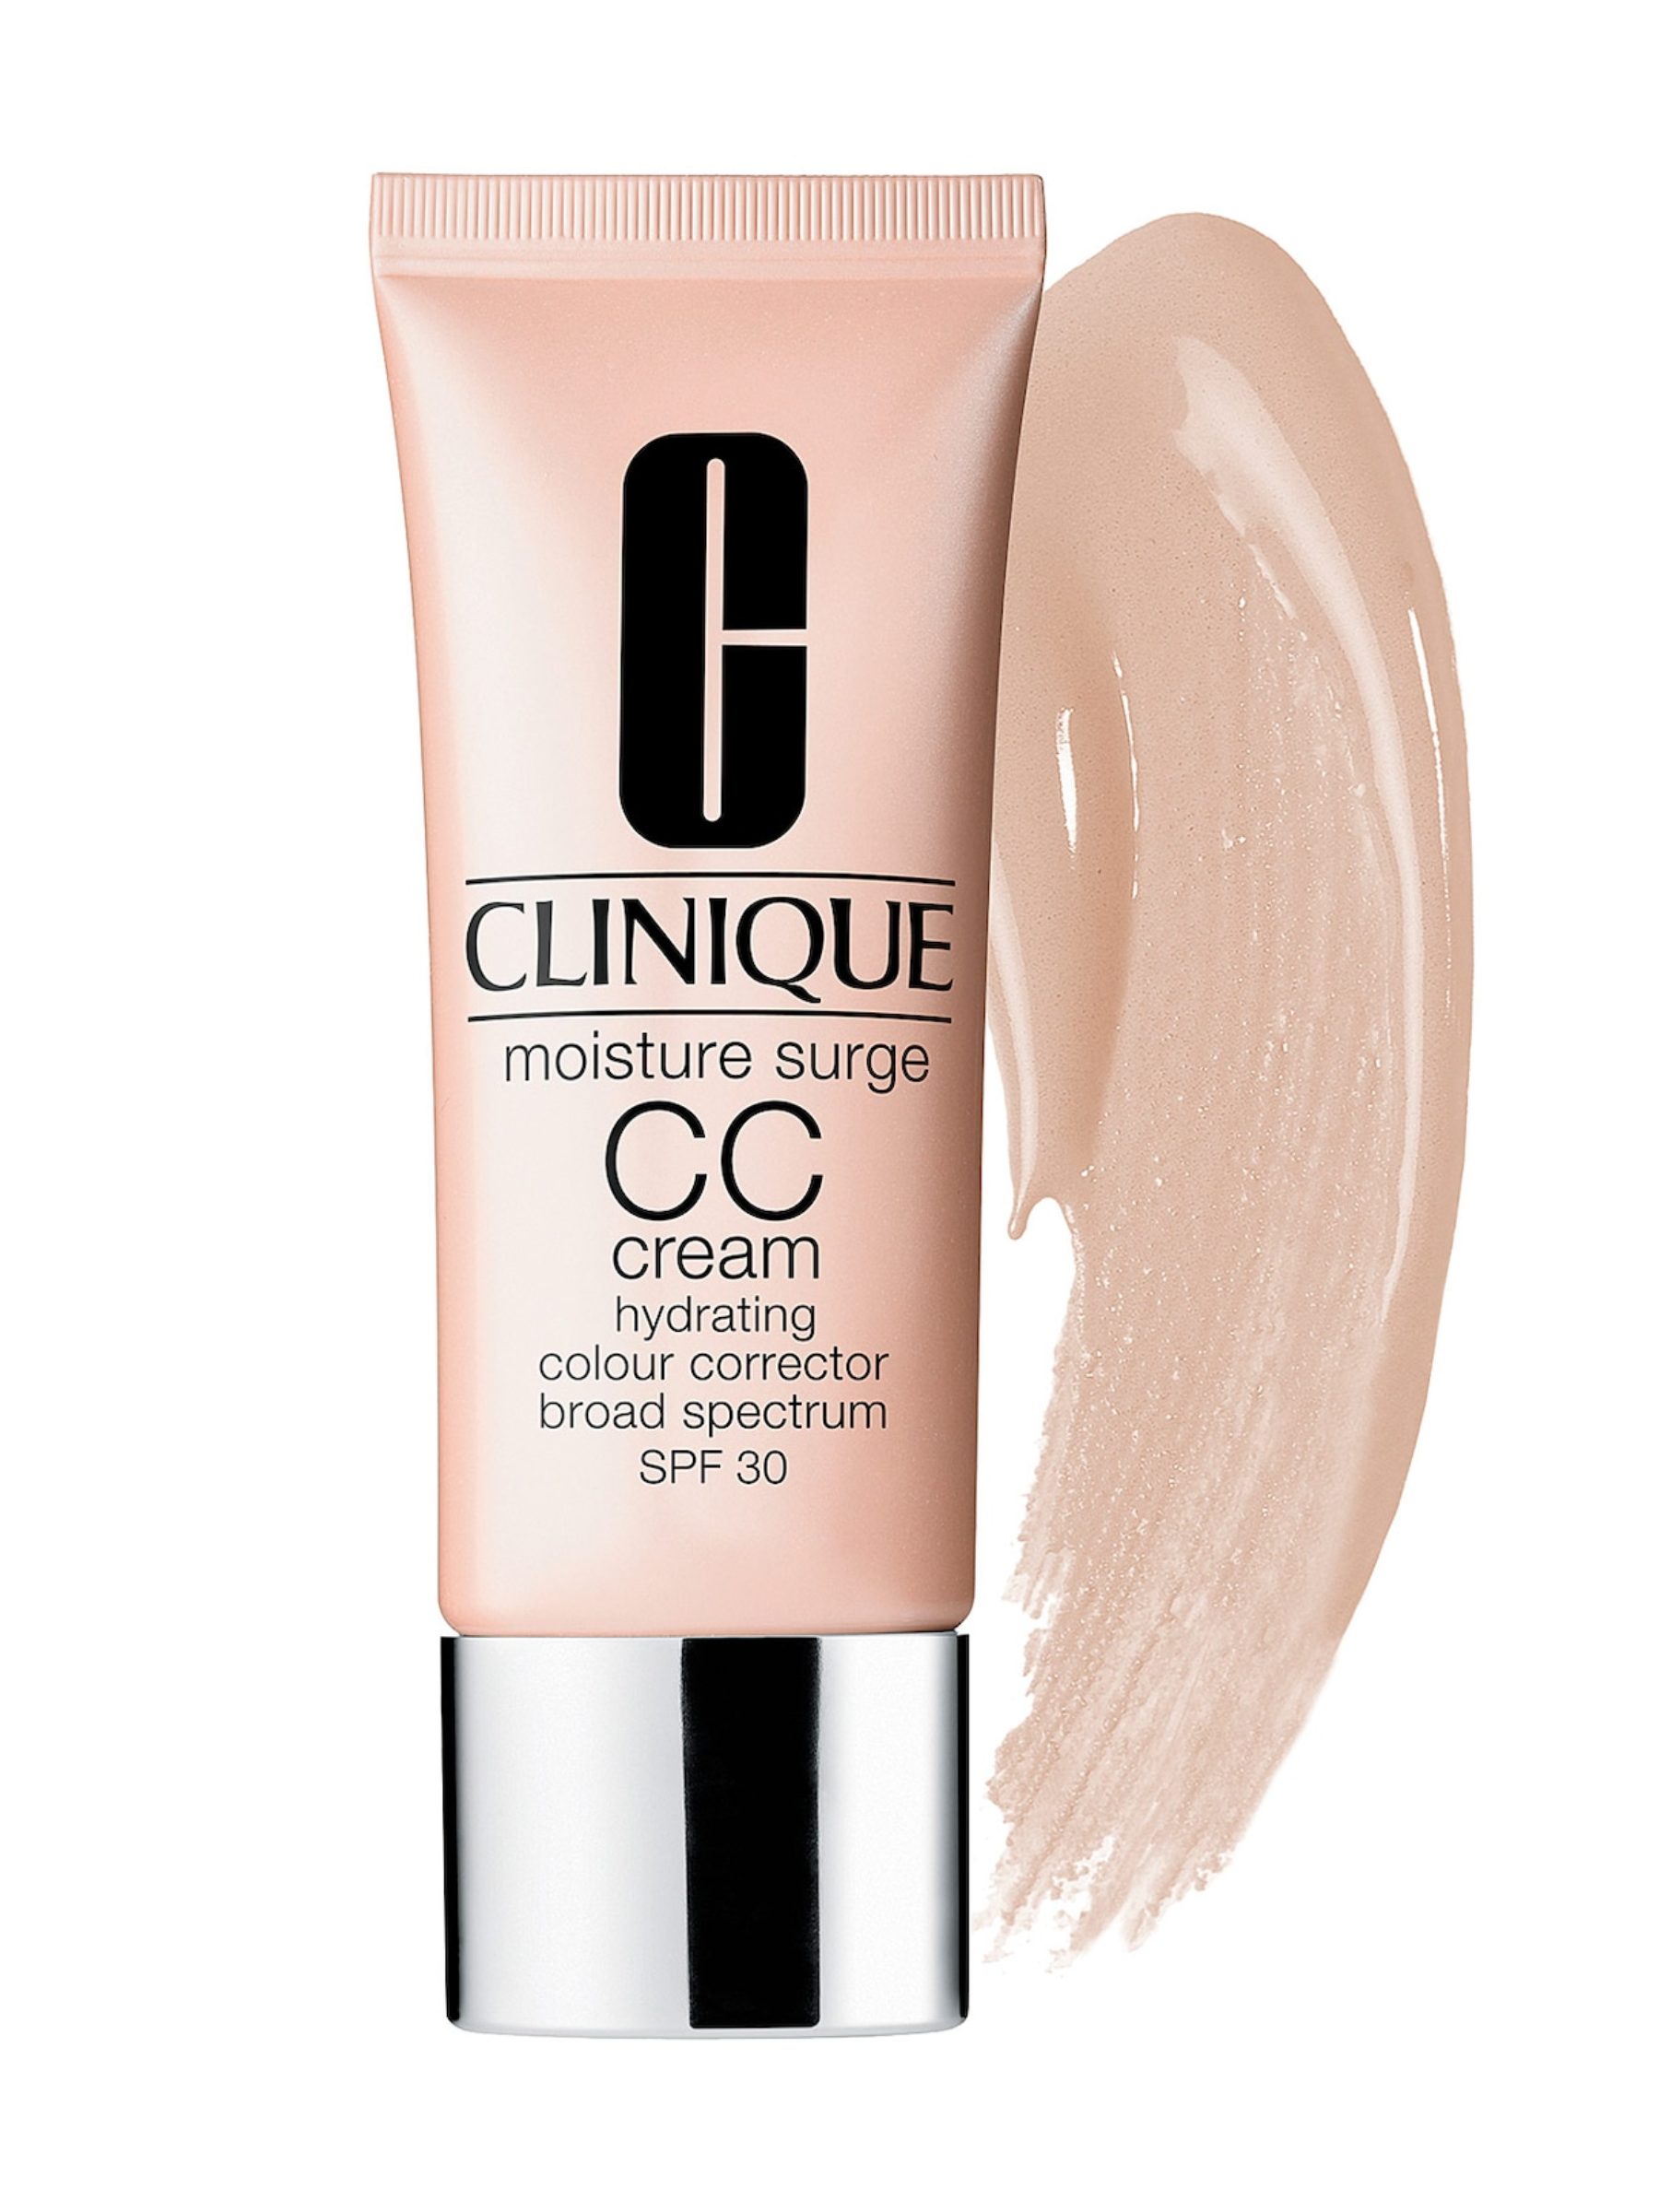 <p>“This CC cream has all the lightweight color correcting benefits needed to reduce redness, sallow skin, and uneven tones while providing a burst of moisture to keep your skin glowing all day,” boasts makeup artist and <a href="https://www.sephora.com/">Sephora</a> beauty director <a href="https://www.instagram.com/davidrazzano/">David Razzano</a>. The oil-free formula is packed with ingredients like squalane and glycerin for moisture, and <a href="https://www.glamour.com/gallery/best-caffeine-eye-cream?mbid=synd_msn_rss&utm_source=msn&utm_medium=syndication">caffeine to brighten the skin</a>, decrease puffiness, and soothe inflammation. And since it’s noncomedogenic and allergy-tested, you can be sure it won’t cause any pesky inflammation or irritation. It’s perfect for those with normal or combination skin looking for lightweight, everyday coverage.</p> <p><strong>Size:</strong> 1.4 ounces / <strong>Shades:</strong> 3 / <strong>Key Ingredients:</strong> Squalane, caffeine, glycerin / <strong>Finish:</strong> Natural / <strong>SPF:</strong> 30</p> <ul> <li>Pros: Lightweight formula, boosts moisture</li> <li>Cons: Limited shade range</li> </ul> $44, Sephora. <a href="https://www.sephora.com/product/moisture-surge-cc-cream-hydrating-colour-corrector-broad-spectrum-spf-30-P378639">Get it now!</a><p>Sign up for today’s biggest stories, from pop culture to politics.</p><a href="https://www.glamour.com/newsletter/news?sourceCode=msnsend">Sign Up</a>